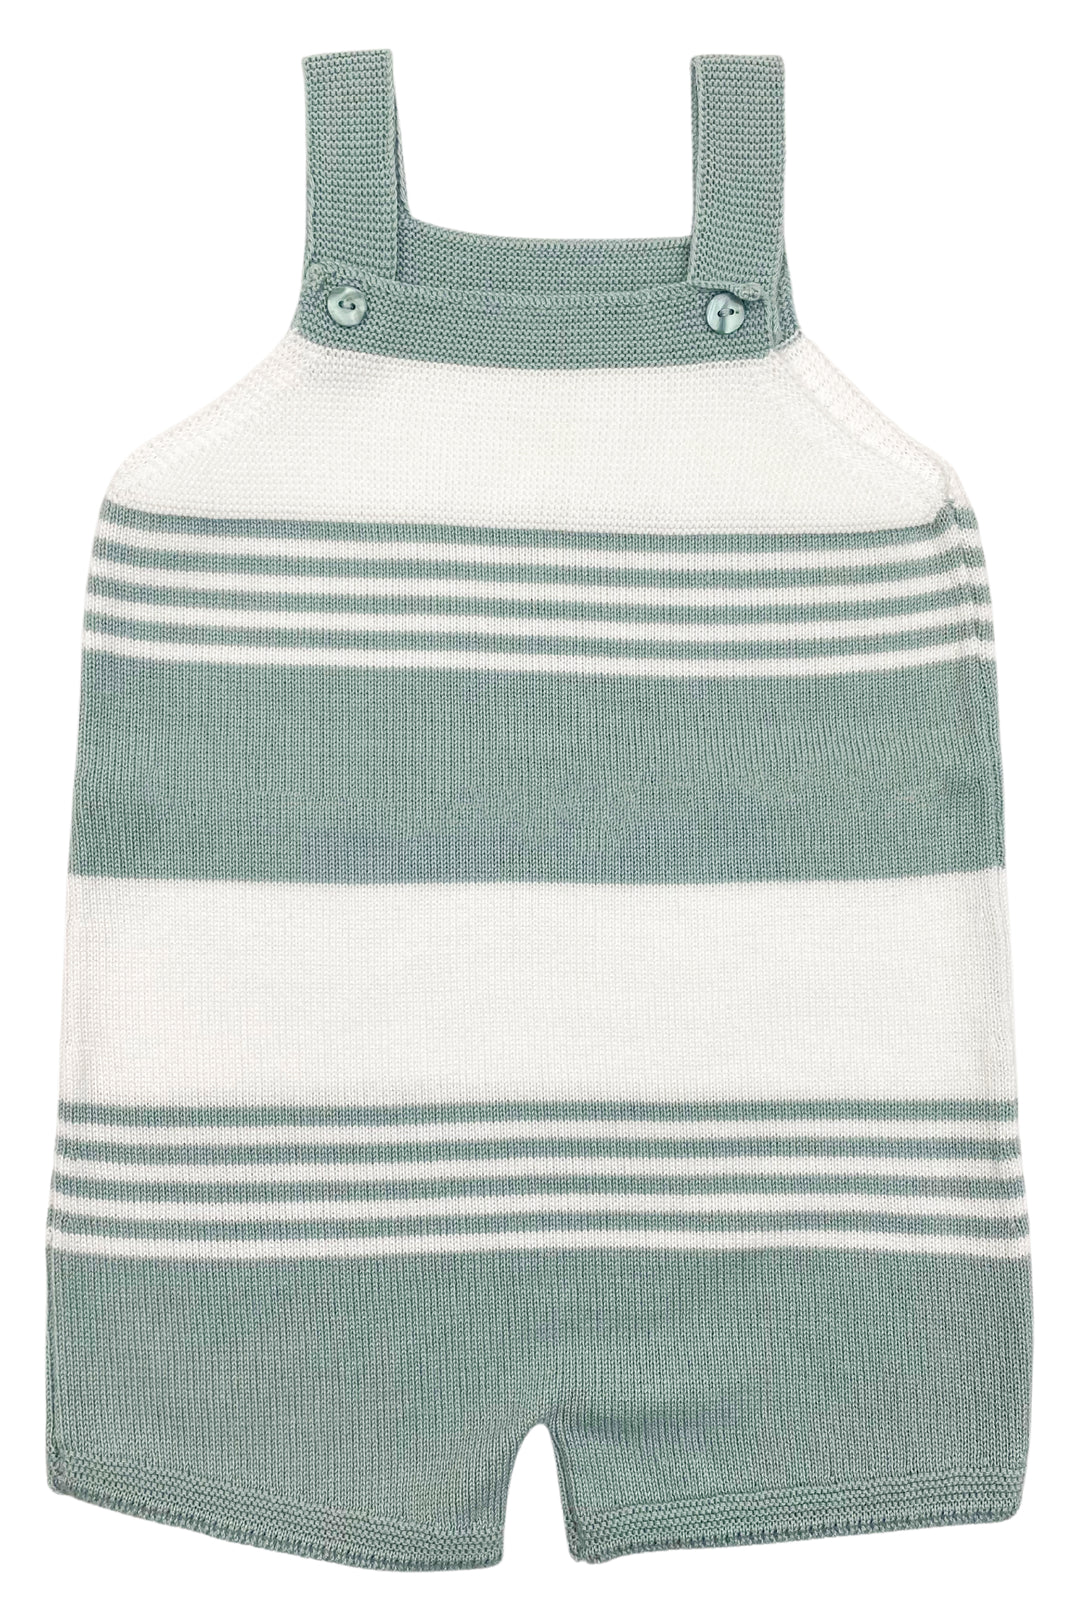 Granlei "Jovie" Teal Stripe Knit Dungarees | iphoneandroidapplications